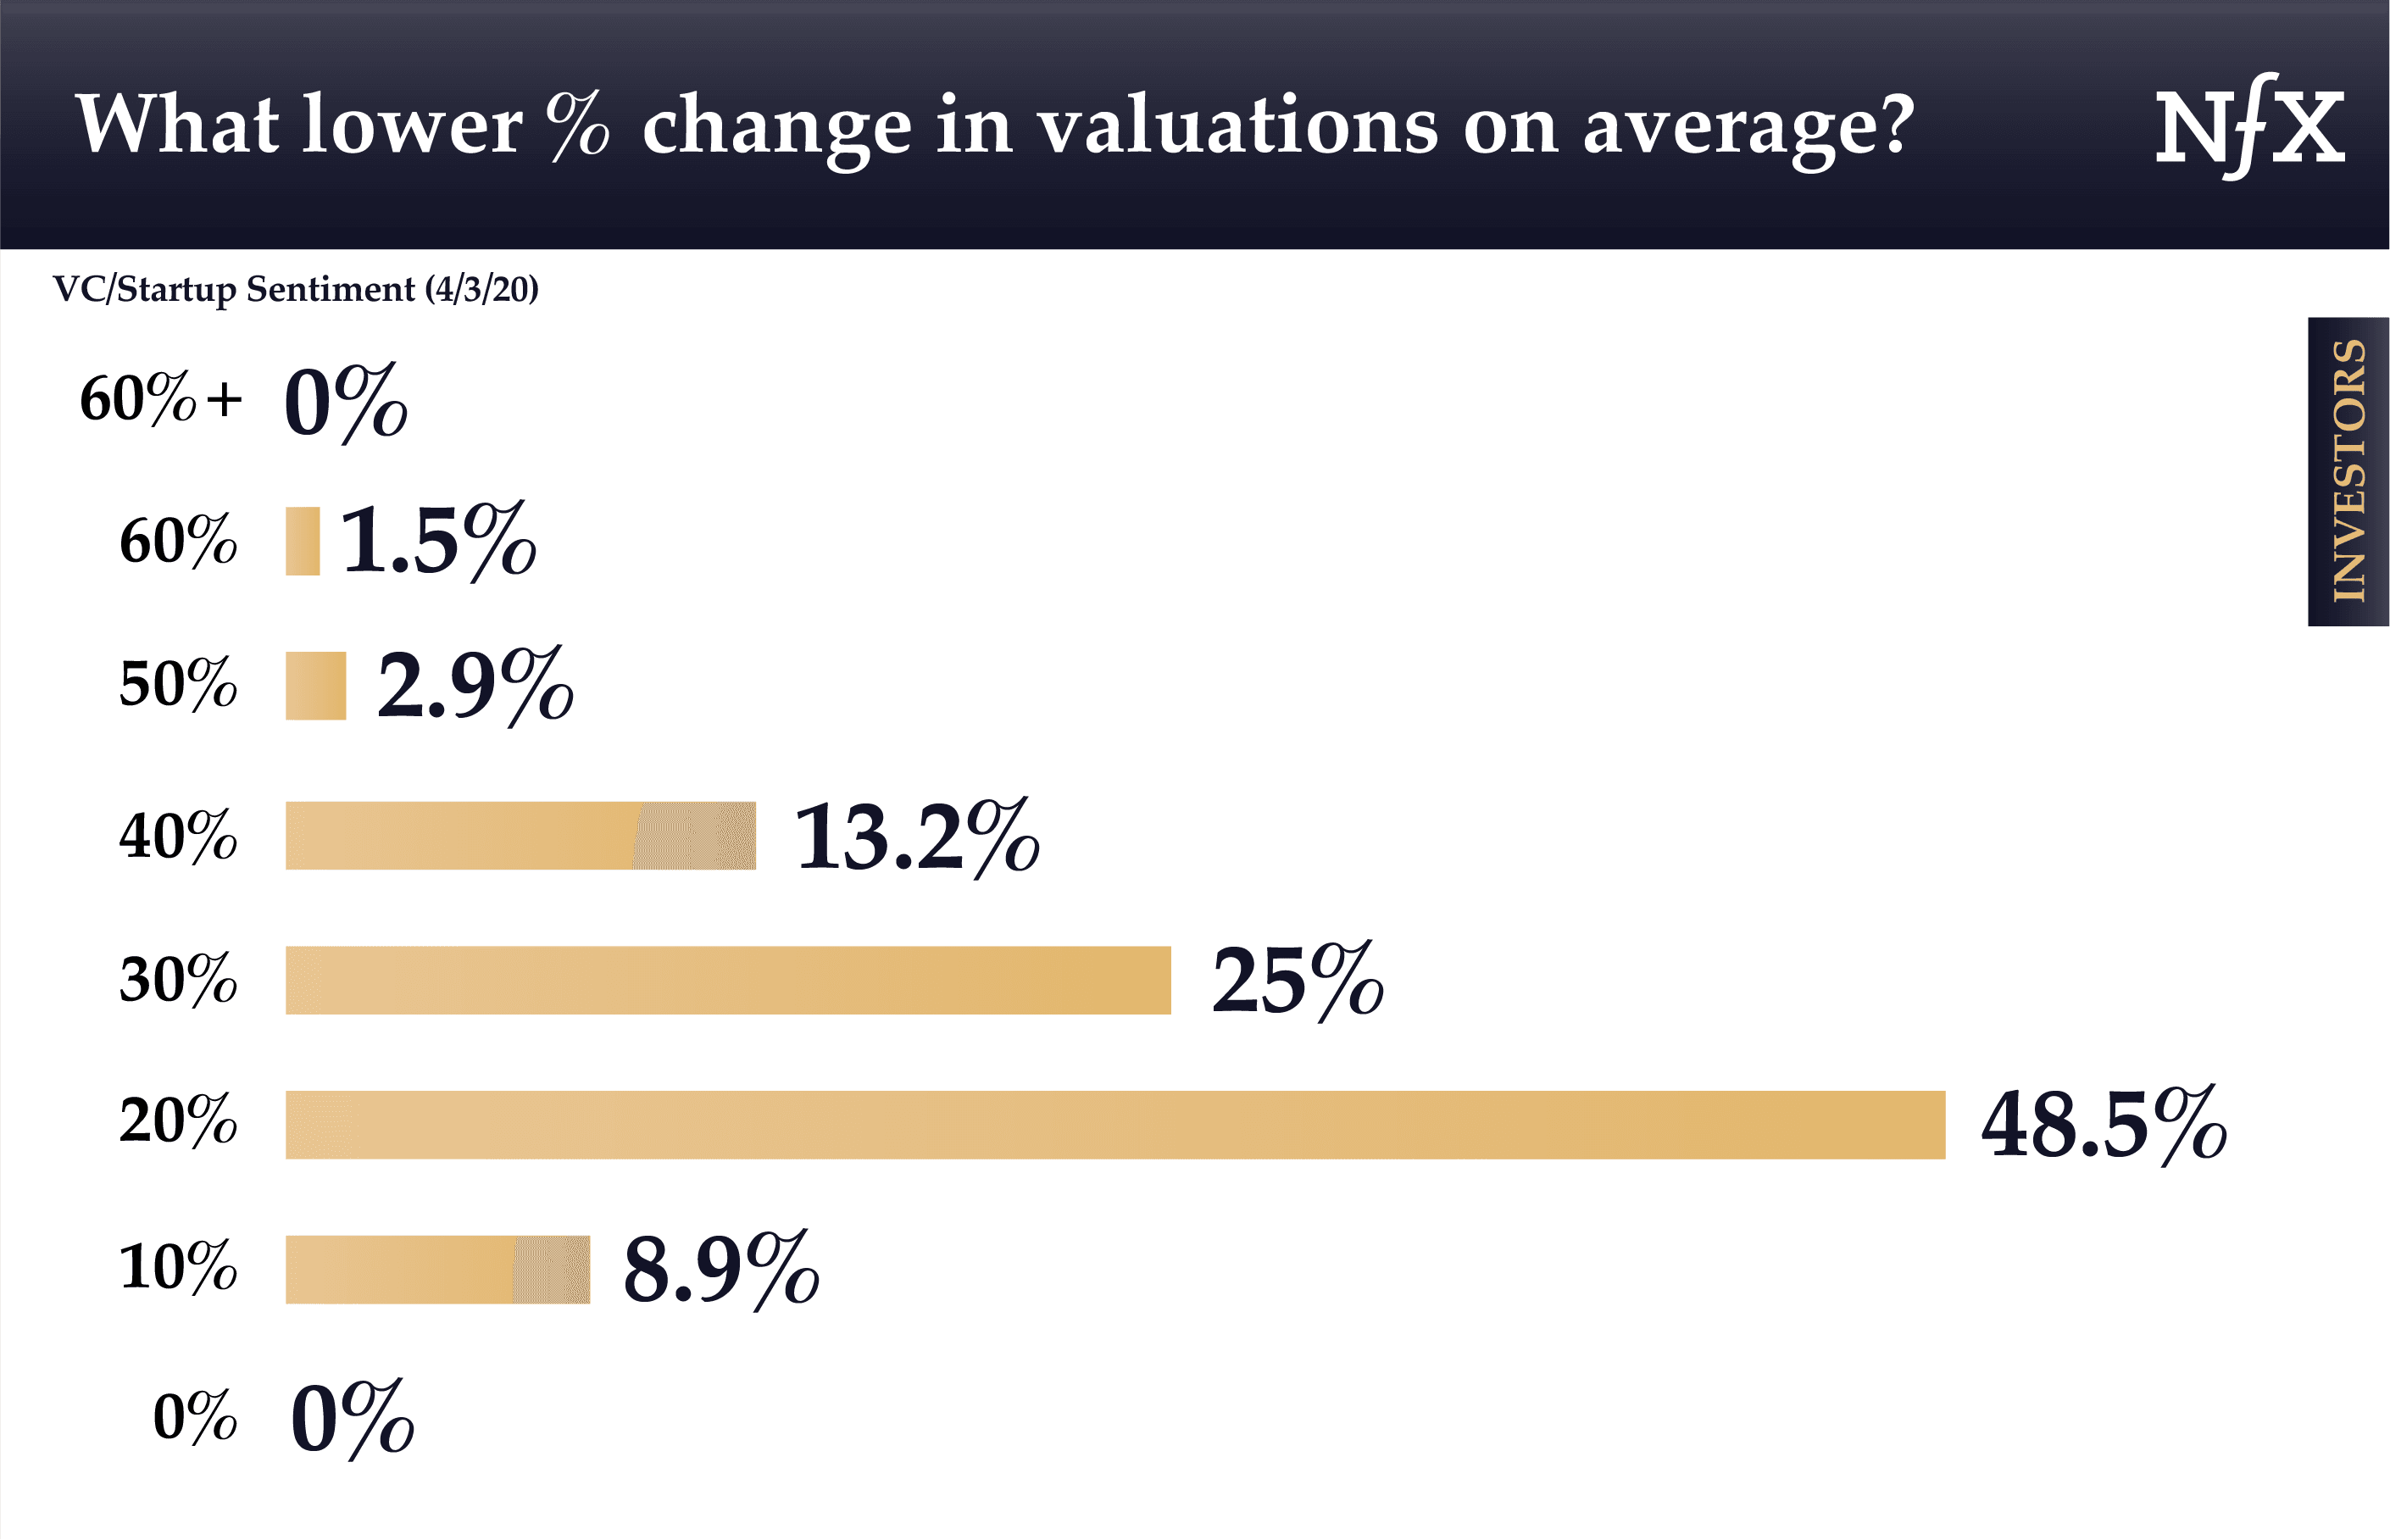 Lower % change in valuations of companies during COVID-19